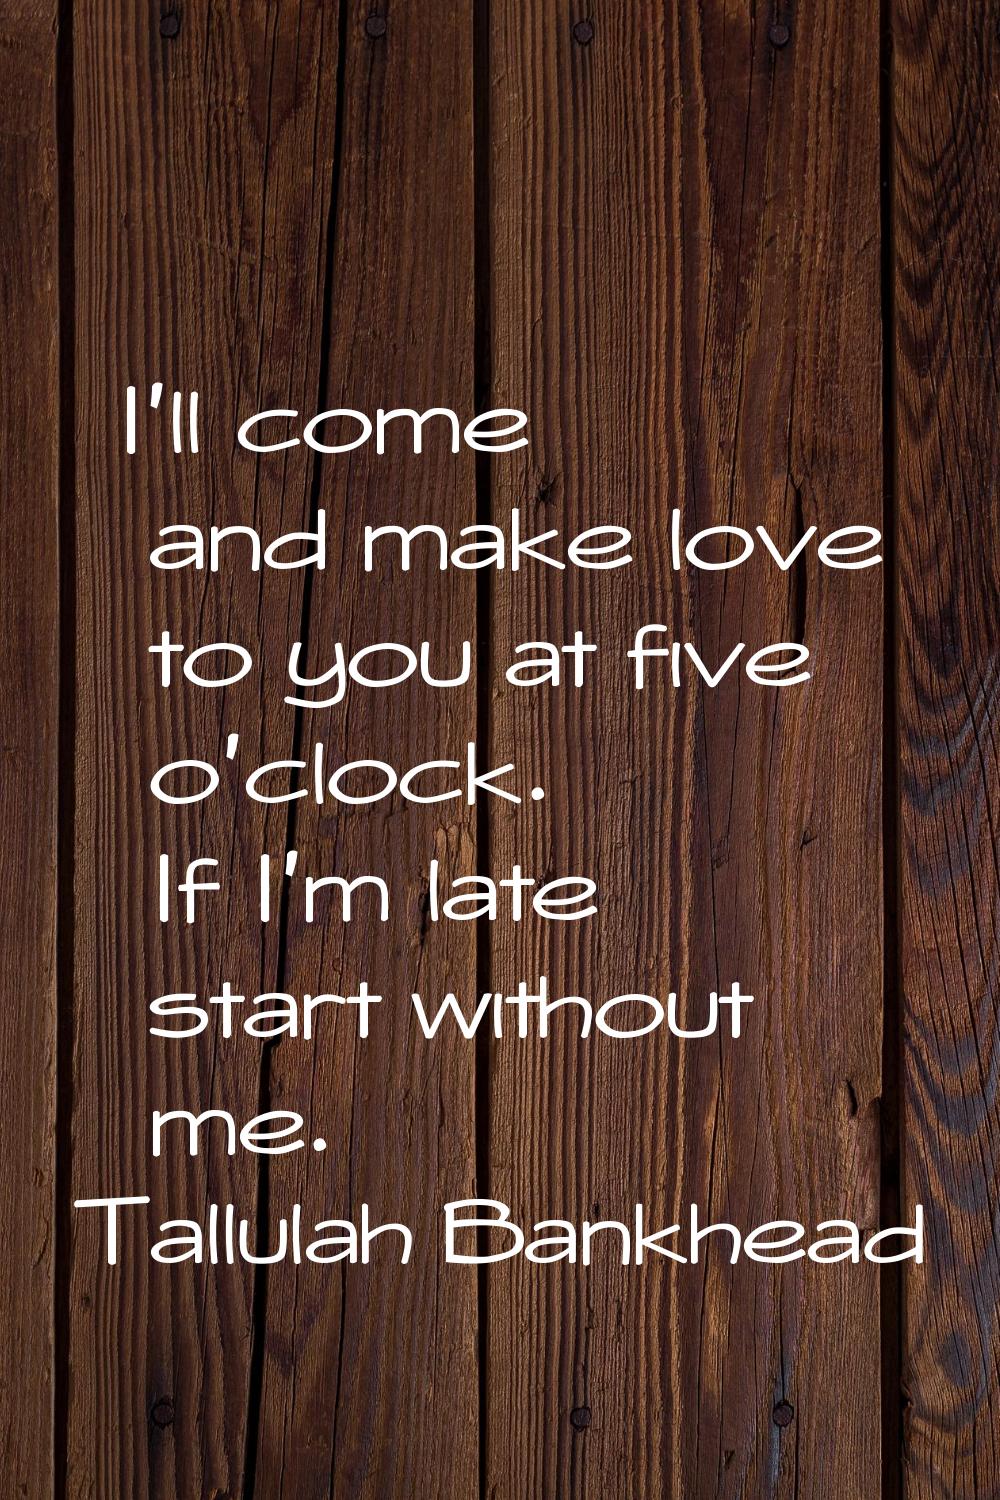 I'll come and make love to you at five o'clock. If I'm late start without me.